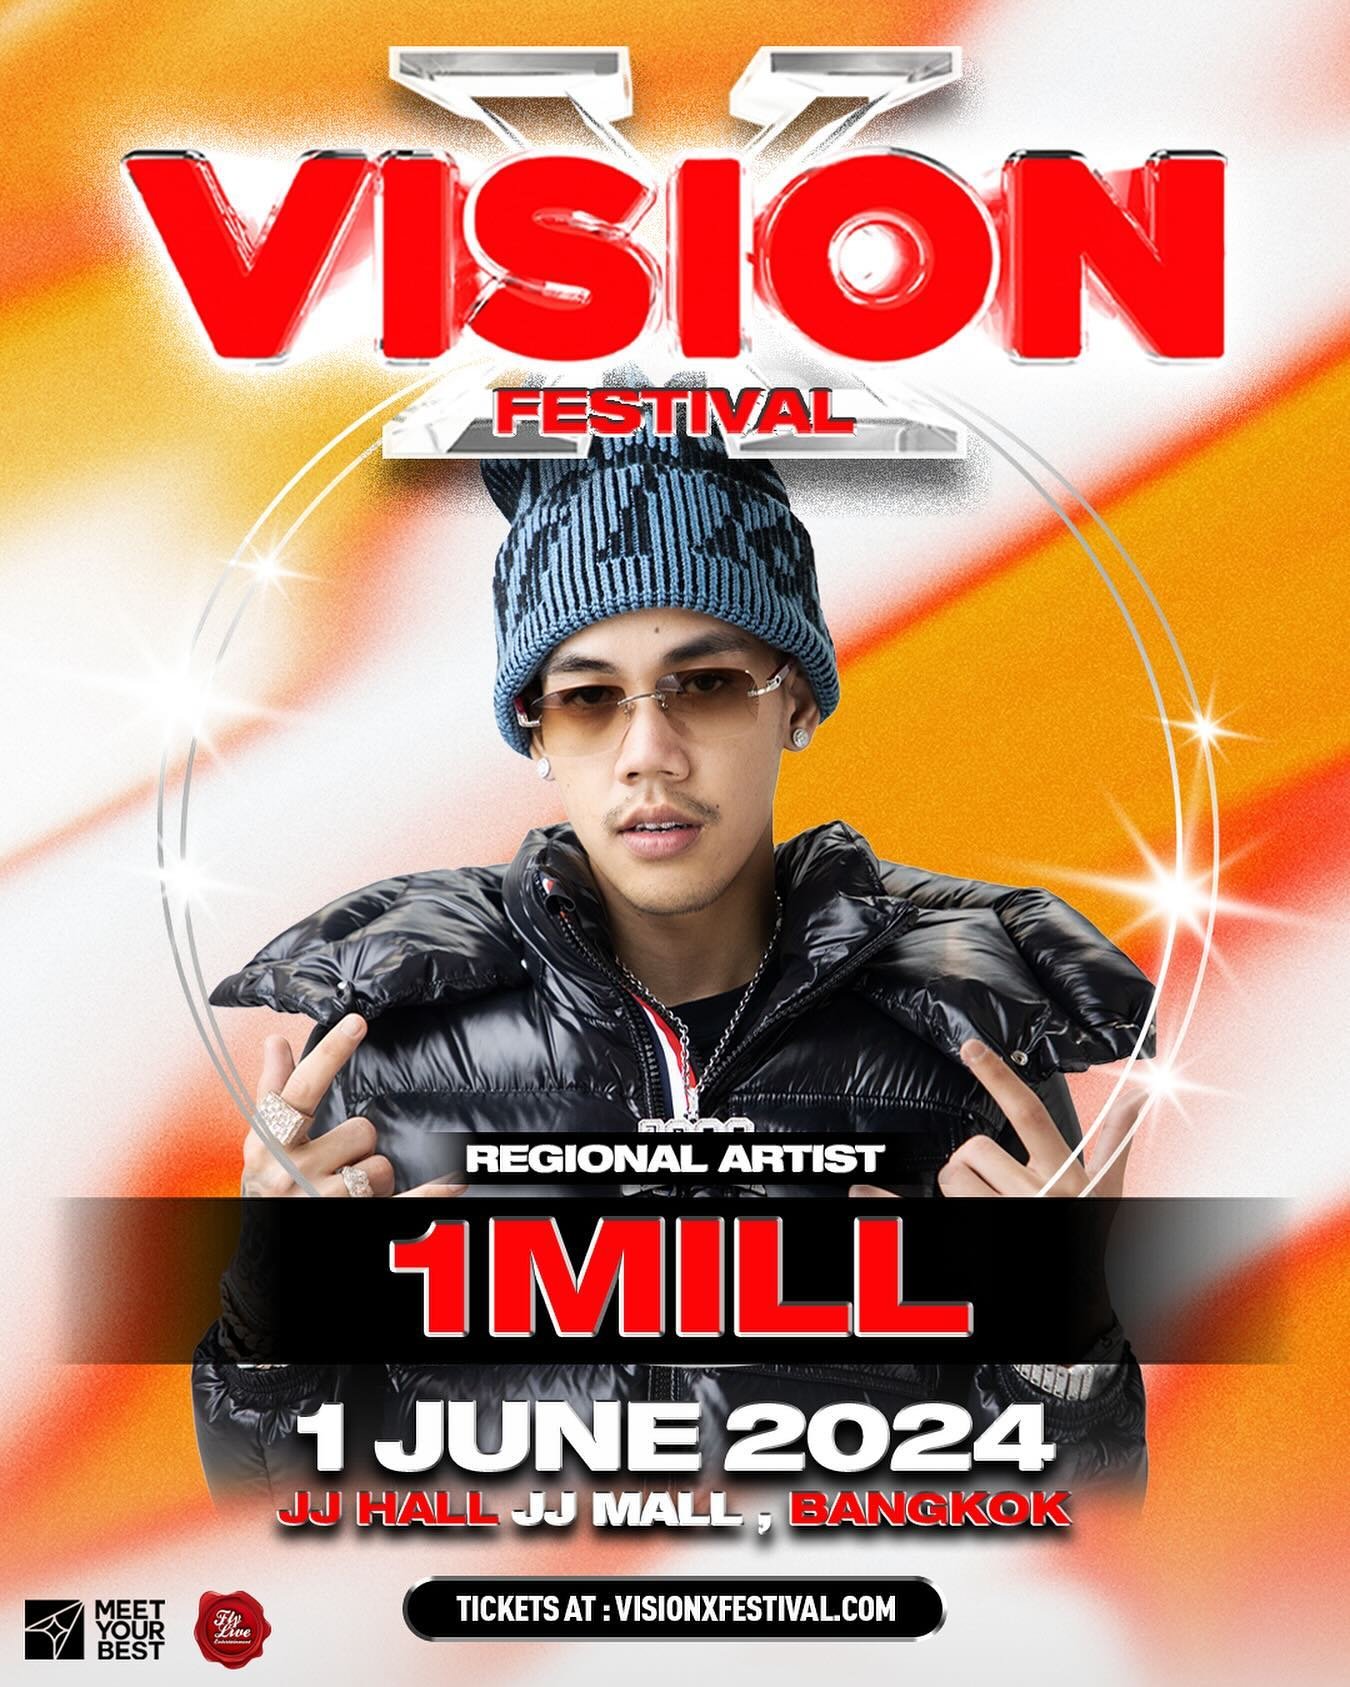 WELCOME THE ONE AND ONLY &lsquo;1MILL&rsquo; 🇹🇭🔥
HEADLINING THAI ARTIST FOR VISION X ‼️

ยินดีต้อนรับ 1MILL 🐍🔥 แรปเปอร์ซุปเปอสตาร์ที่จะมานำทีมศิลปินไทยในงาน VISION X ครั้งนี้ ‼️

TIER 2 TICKETS OPEN NOW 👇

Get tickets now 👉🏼 visionxfestival.c